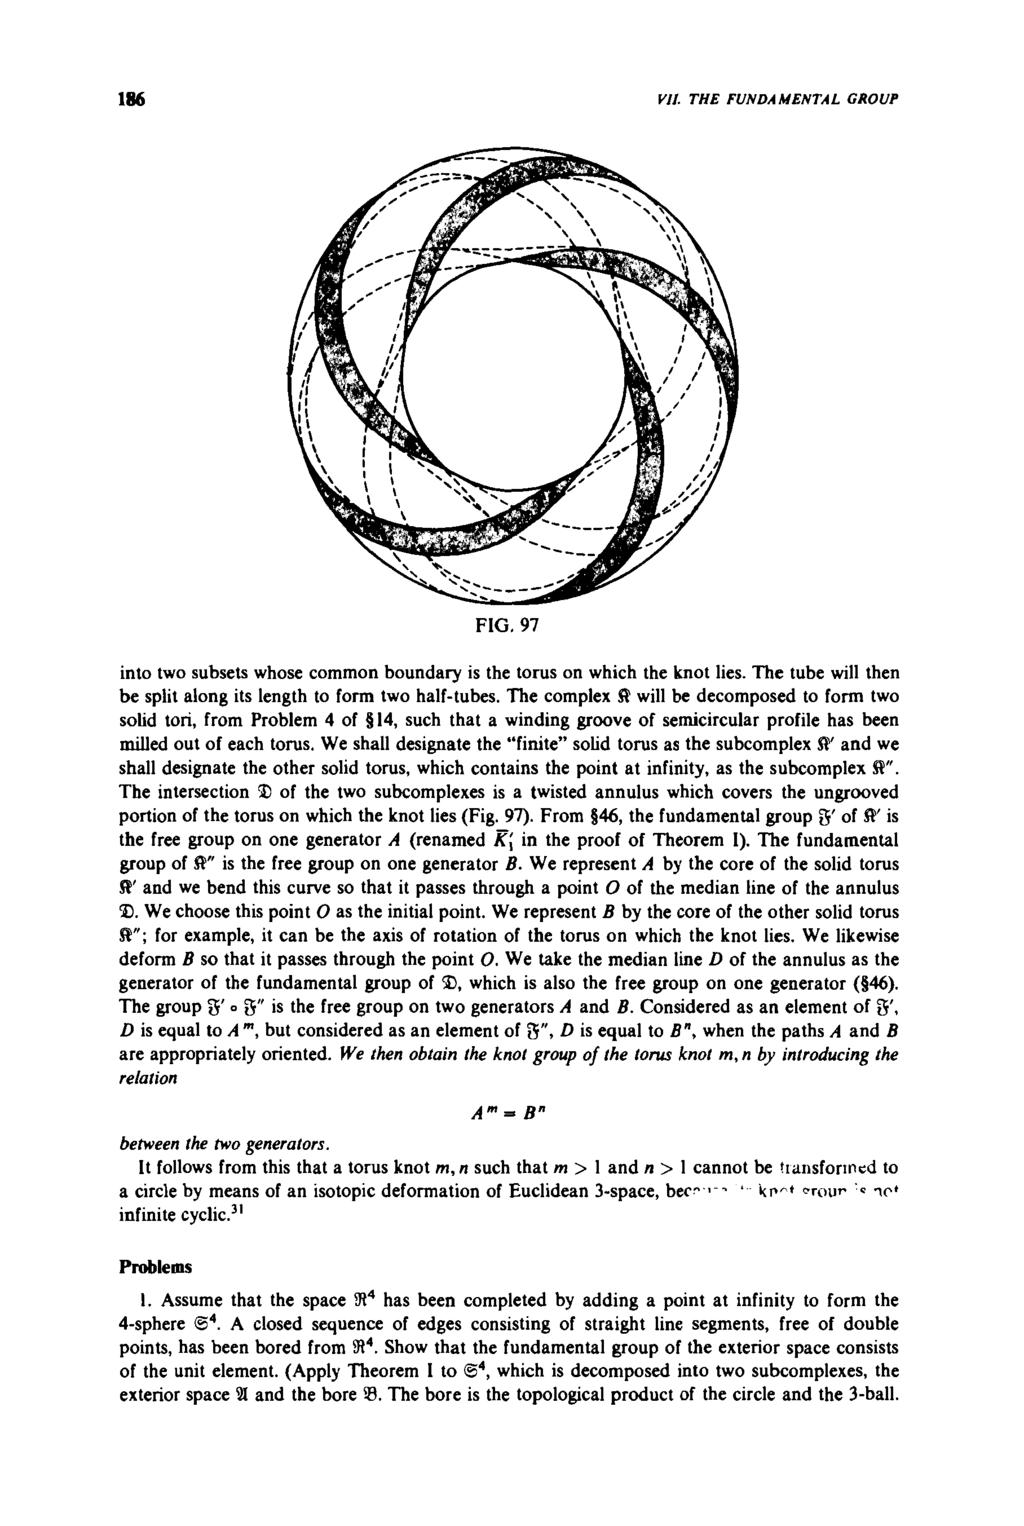 The torus knots I. For coprime m, n 1 use the embedding to define the torus knots S 1 S 1 S 1 ; z (z m, z n ) T m,n : S 1 S 1 S 1 S 3. 186 VII. THE FUNDAMENTAL GROUP 33 FIG.